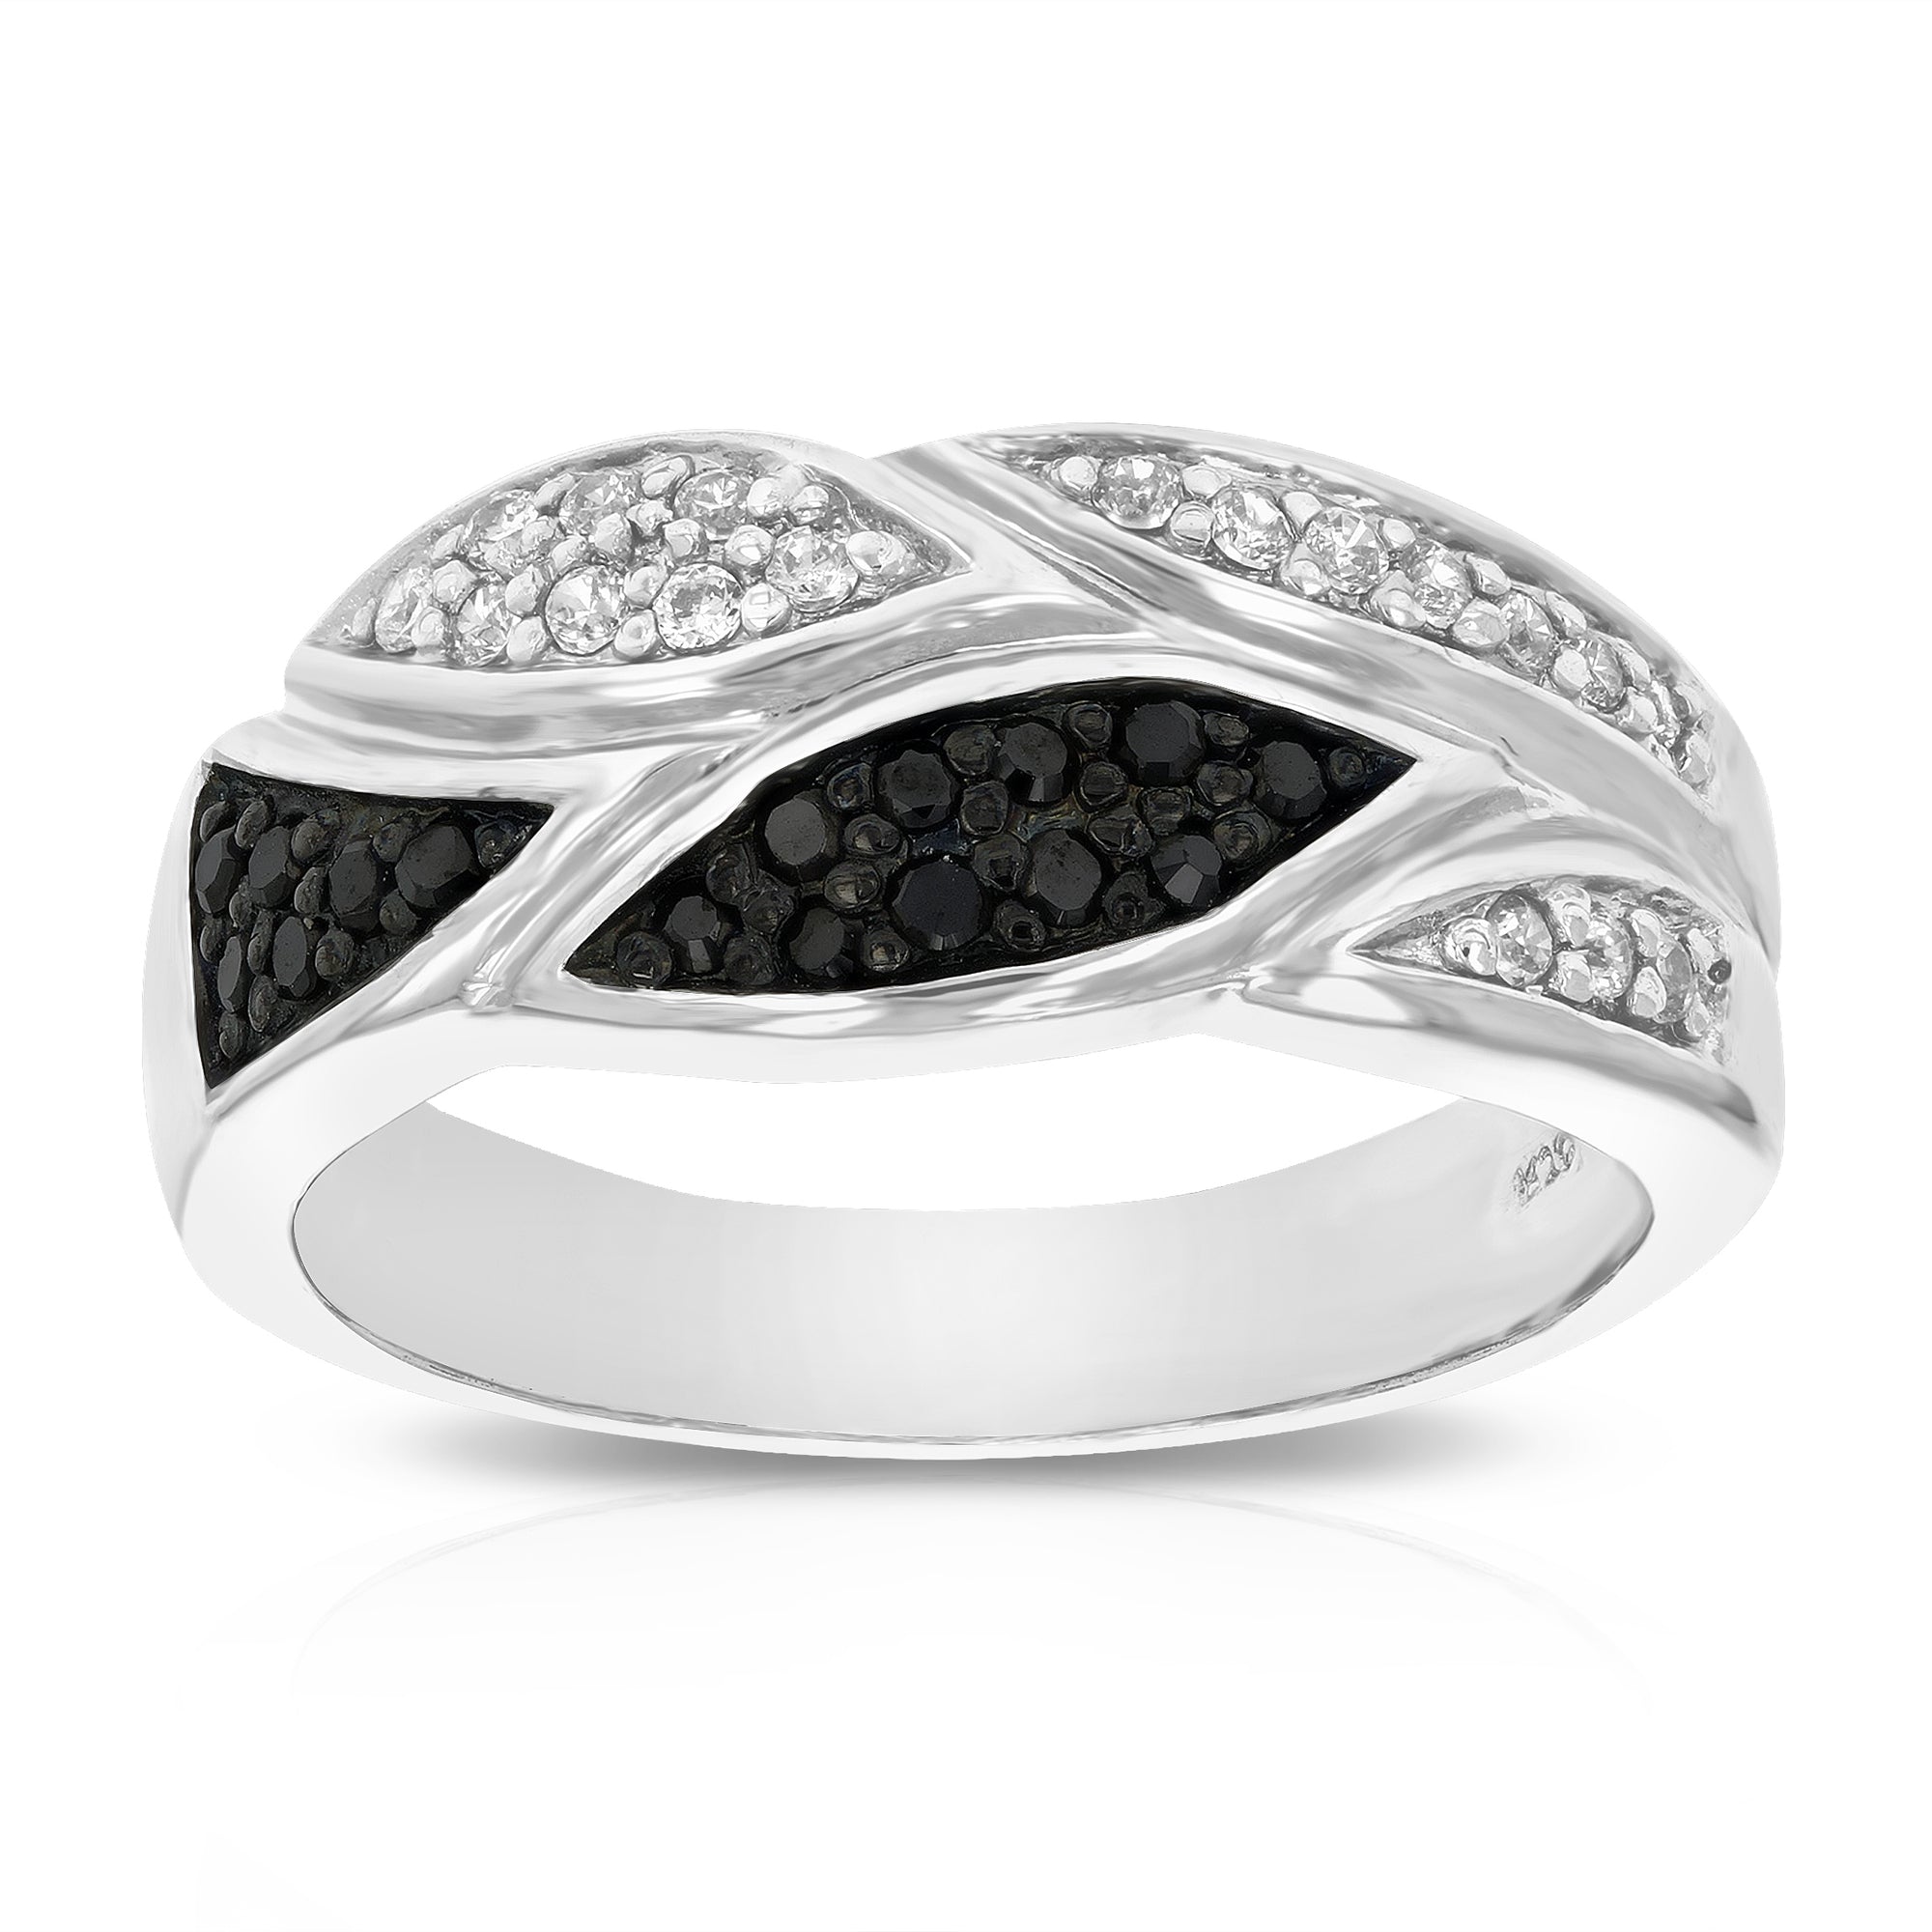 Sterling Silver Black Diamond Ring (1/3 cttw) Size 7